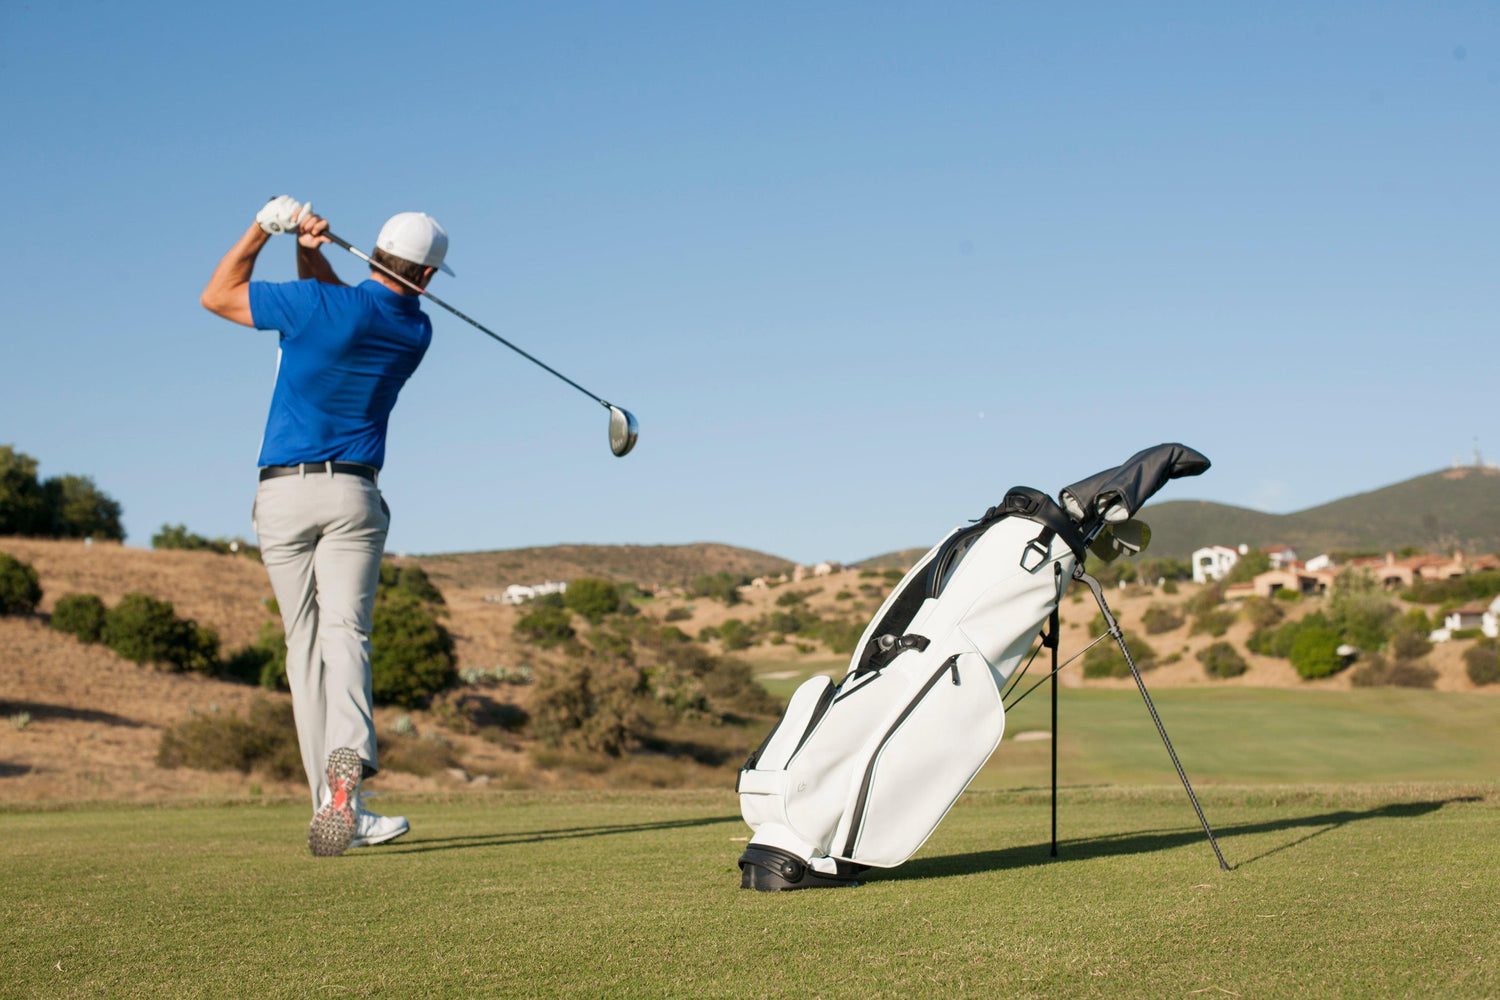 We create luxury golf bags & accessories for golfers who expect the most  from their gear.